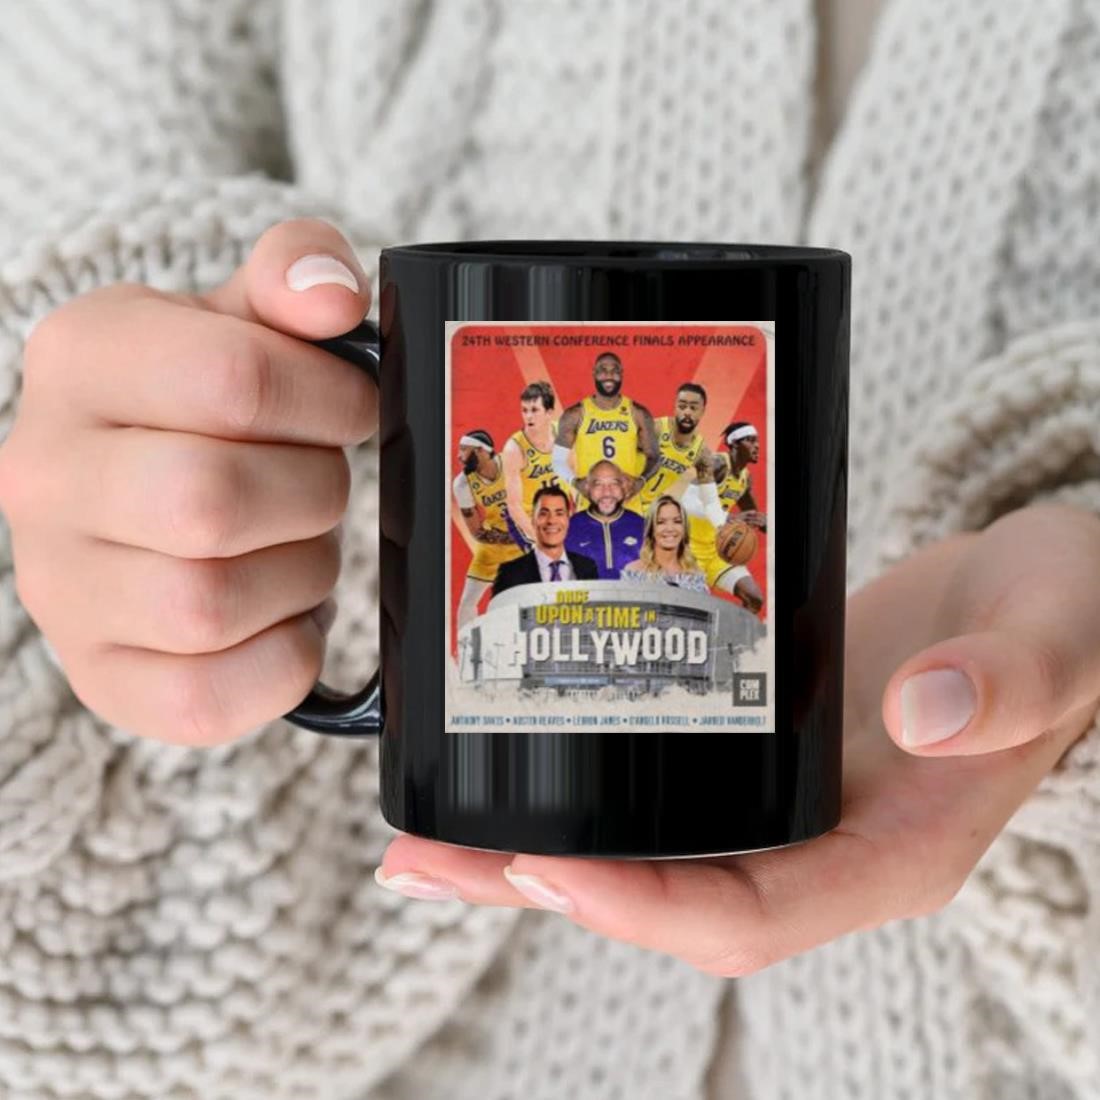 Los Angeles Lakers 24th Western Conference Finals Appearance Once Upon A Time In Hollywood Mug